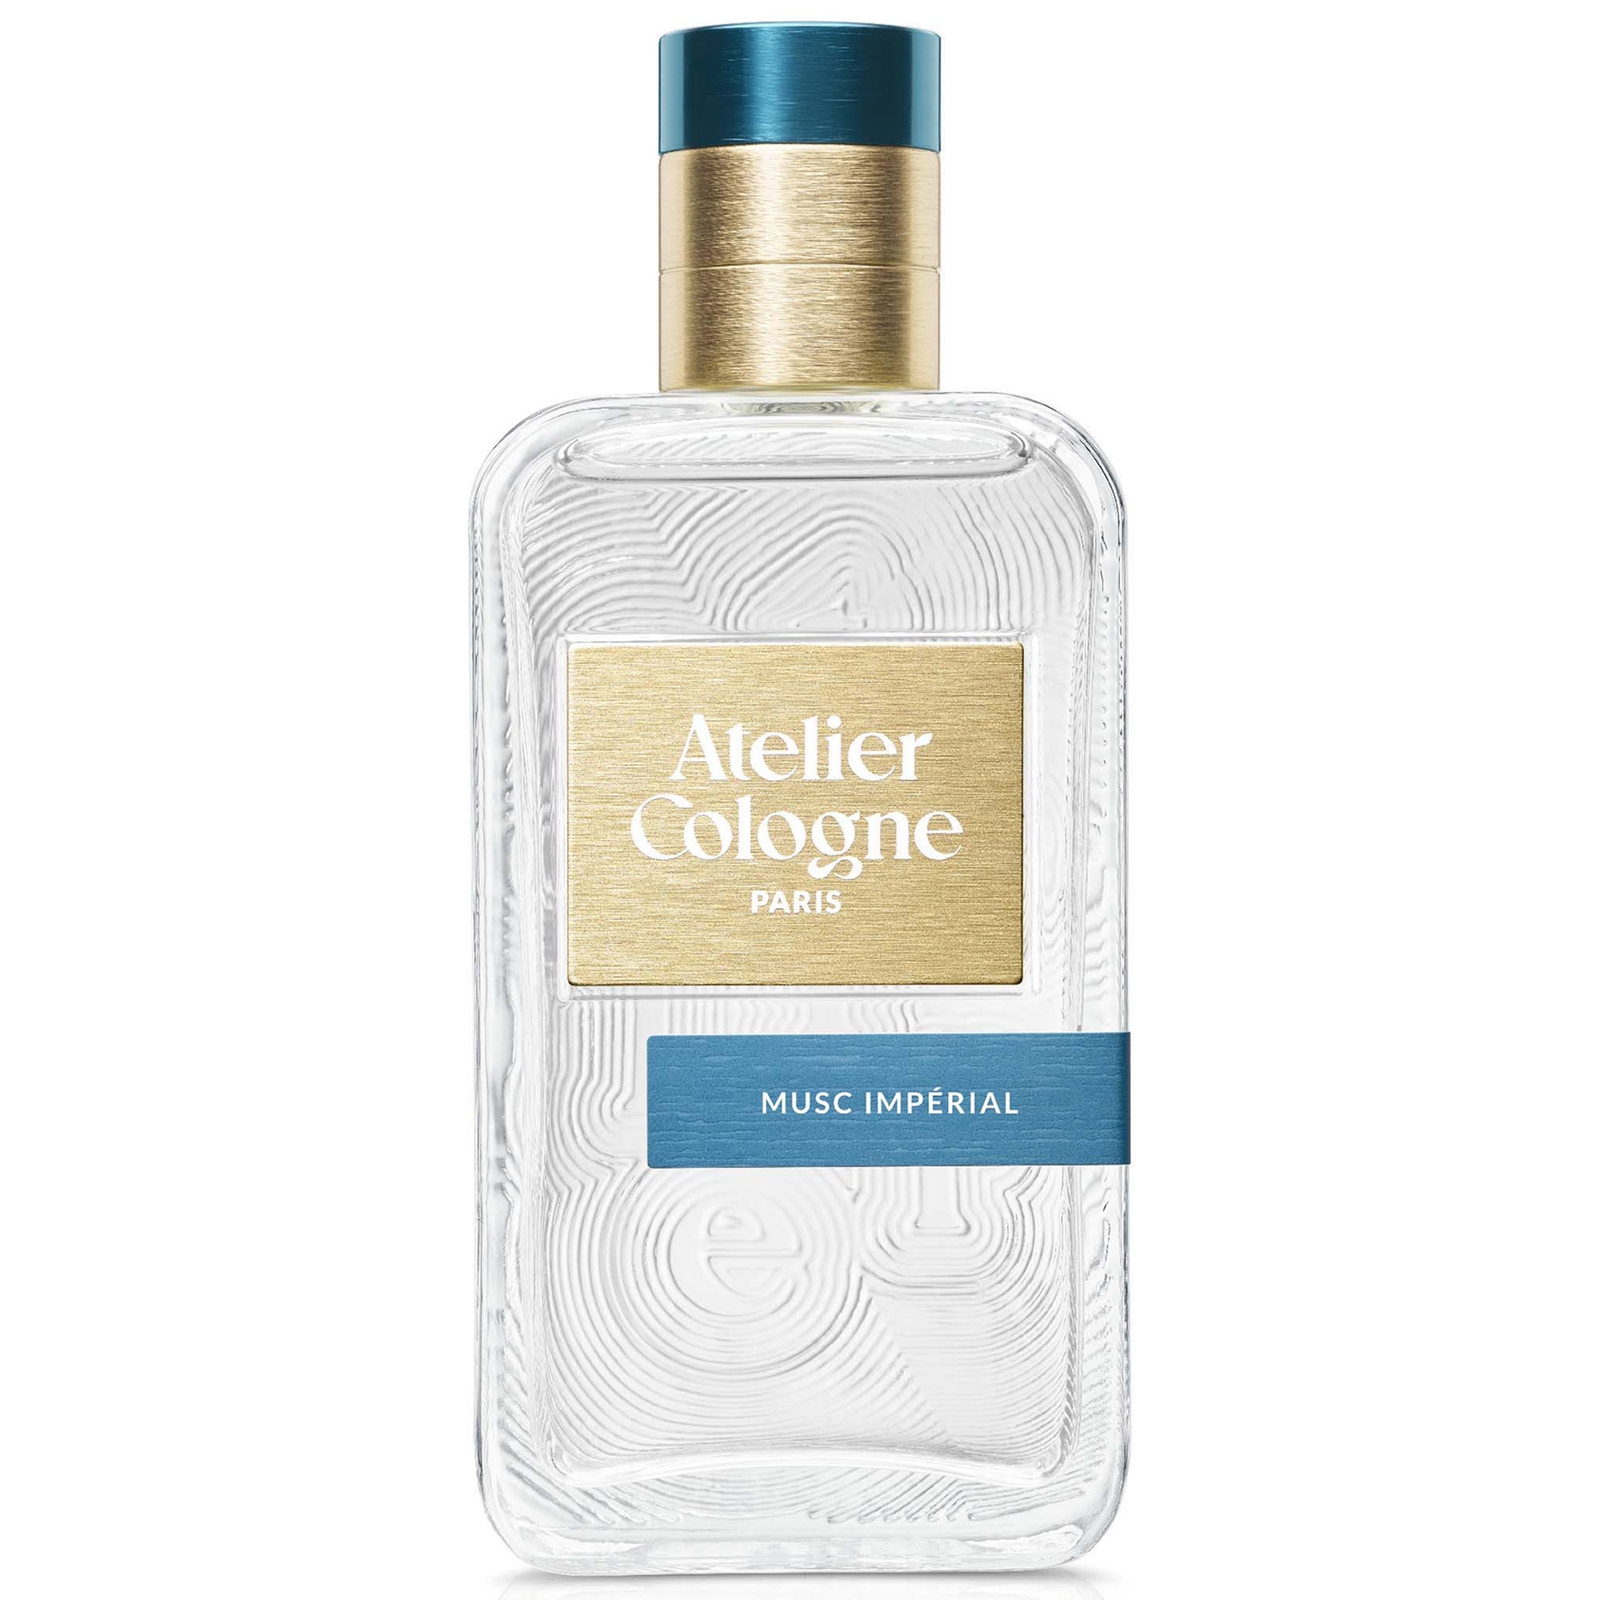 Atelier Cologne Musc Imperial 100ml